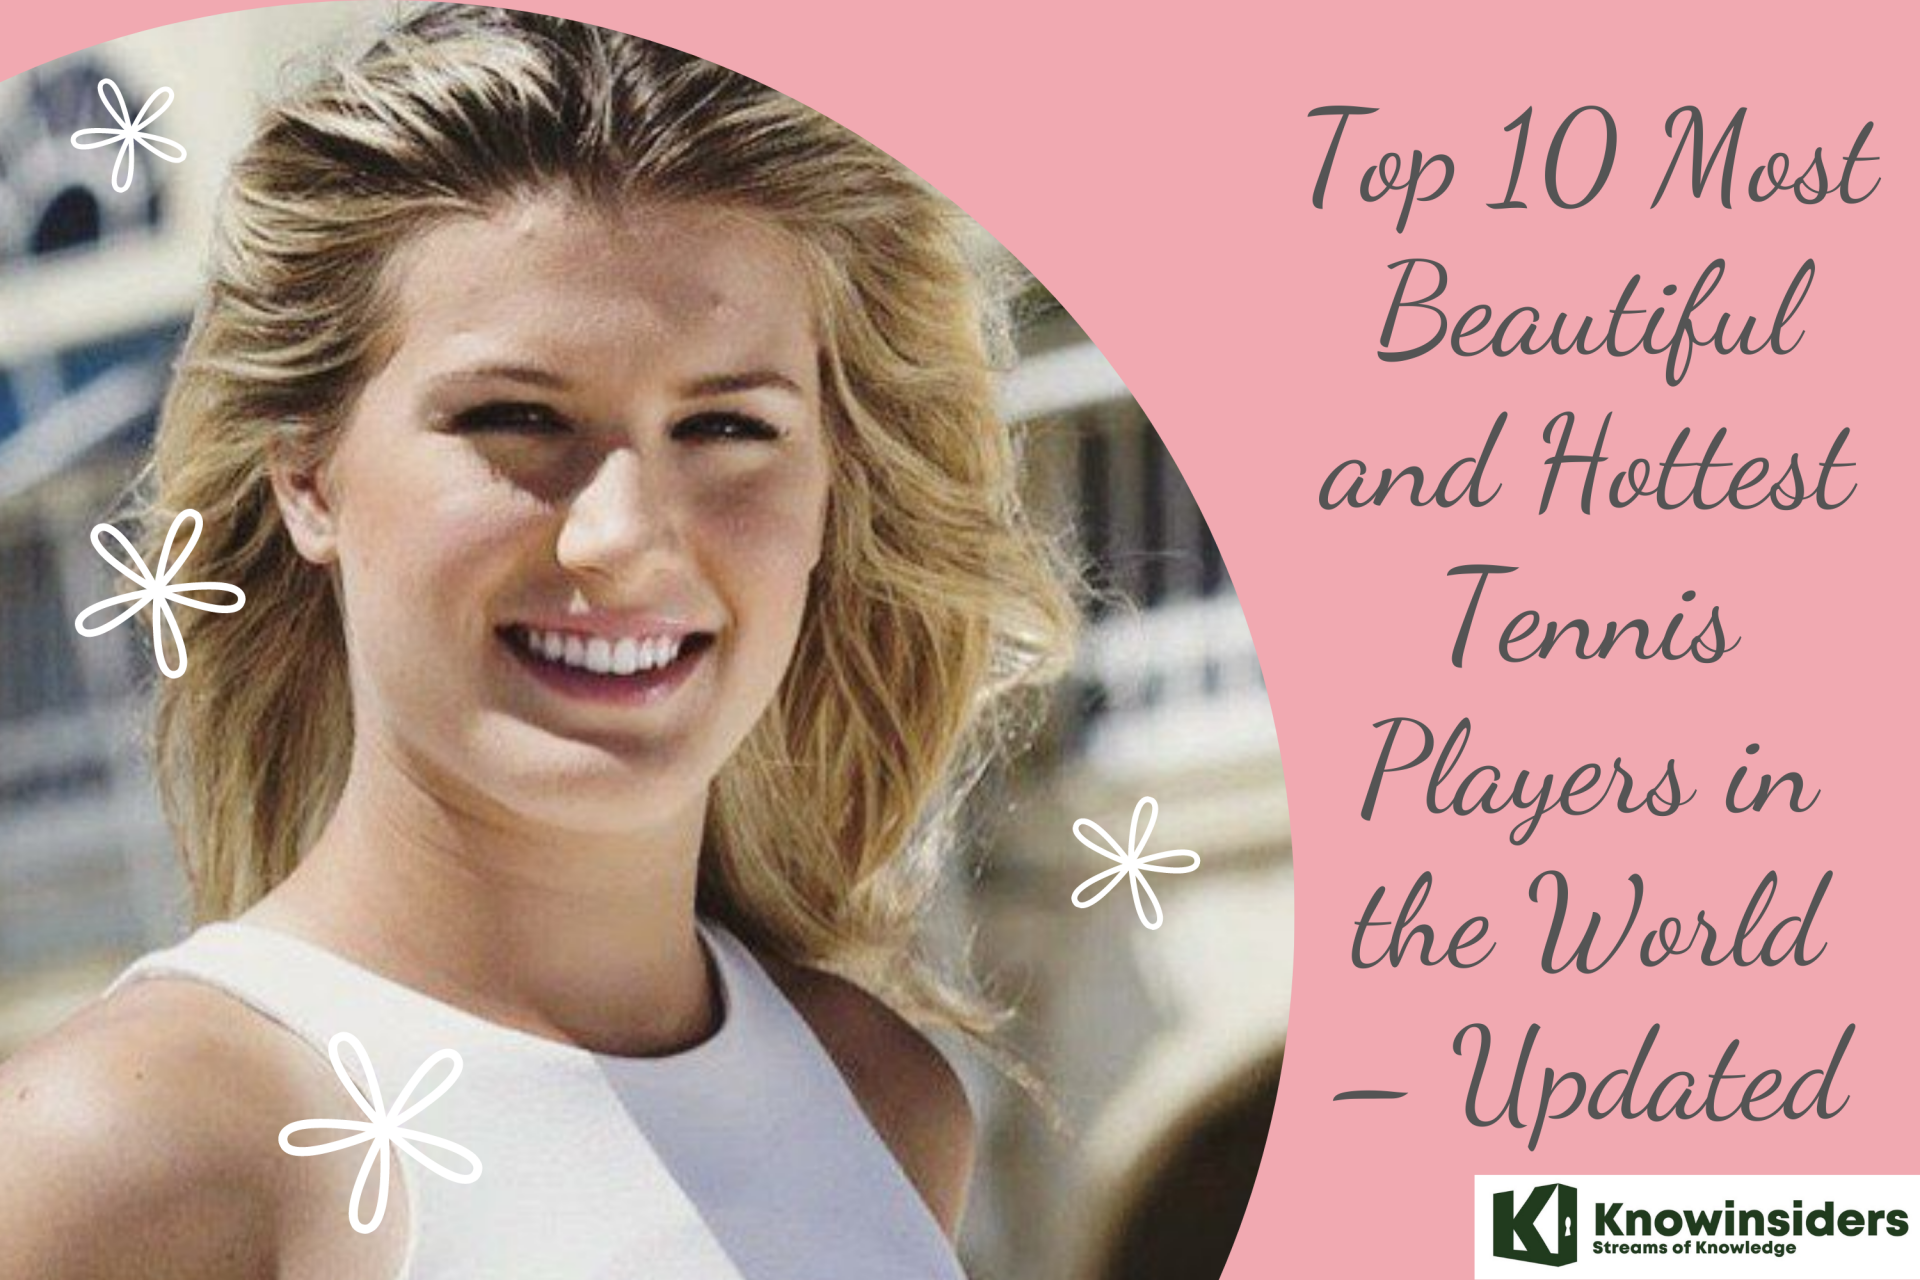 Top 10 Most Beautiful and Hottest Tennis Players in the World Today